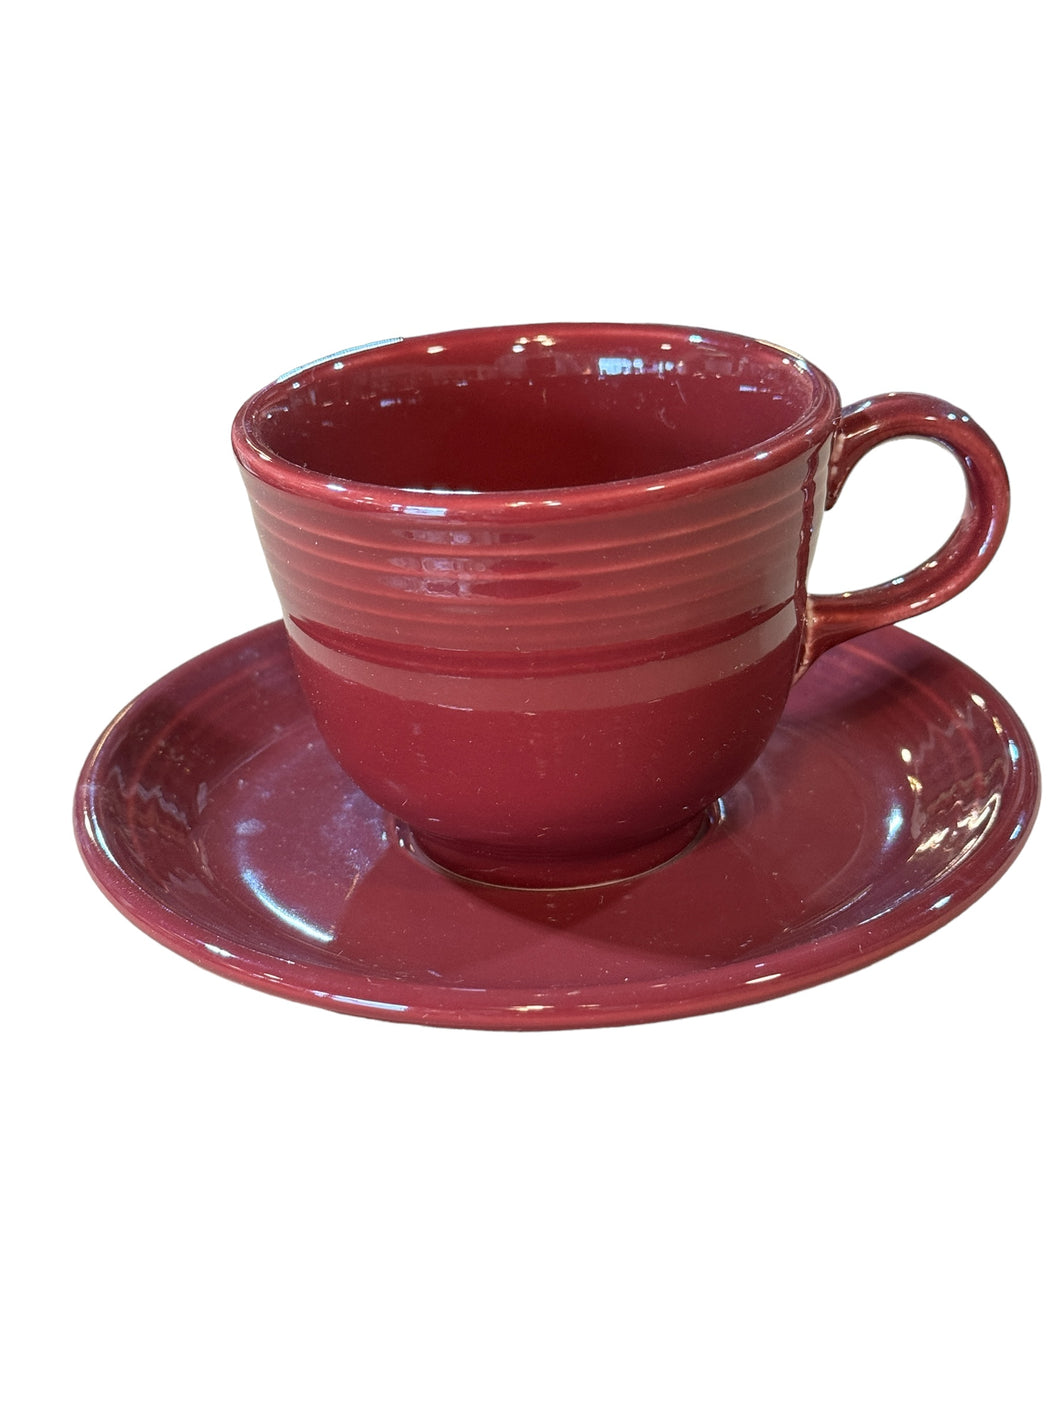 Fiesta Cinnabar Cup and Saucer Retired Color